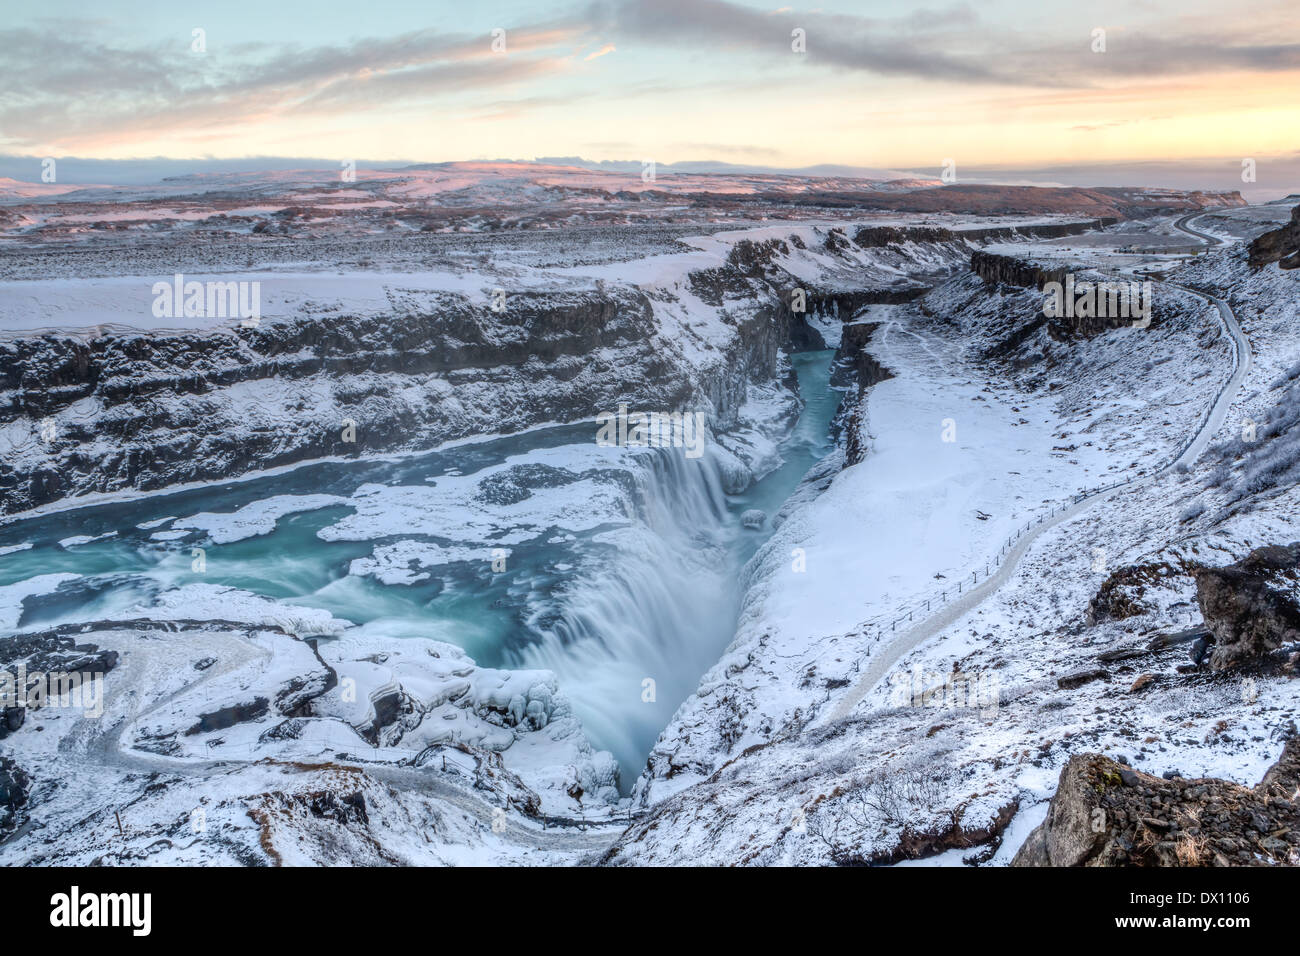 Majestic Gullfoss falls into a wintry gorge at sunset in Western Iceland Stock Photo